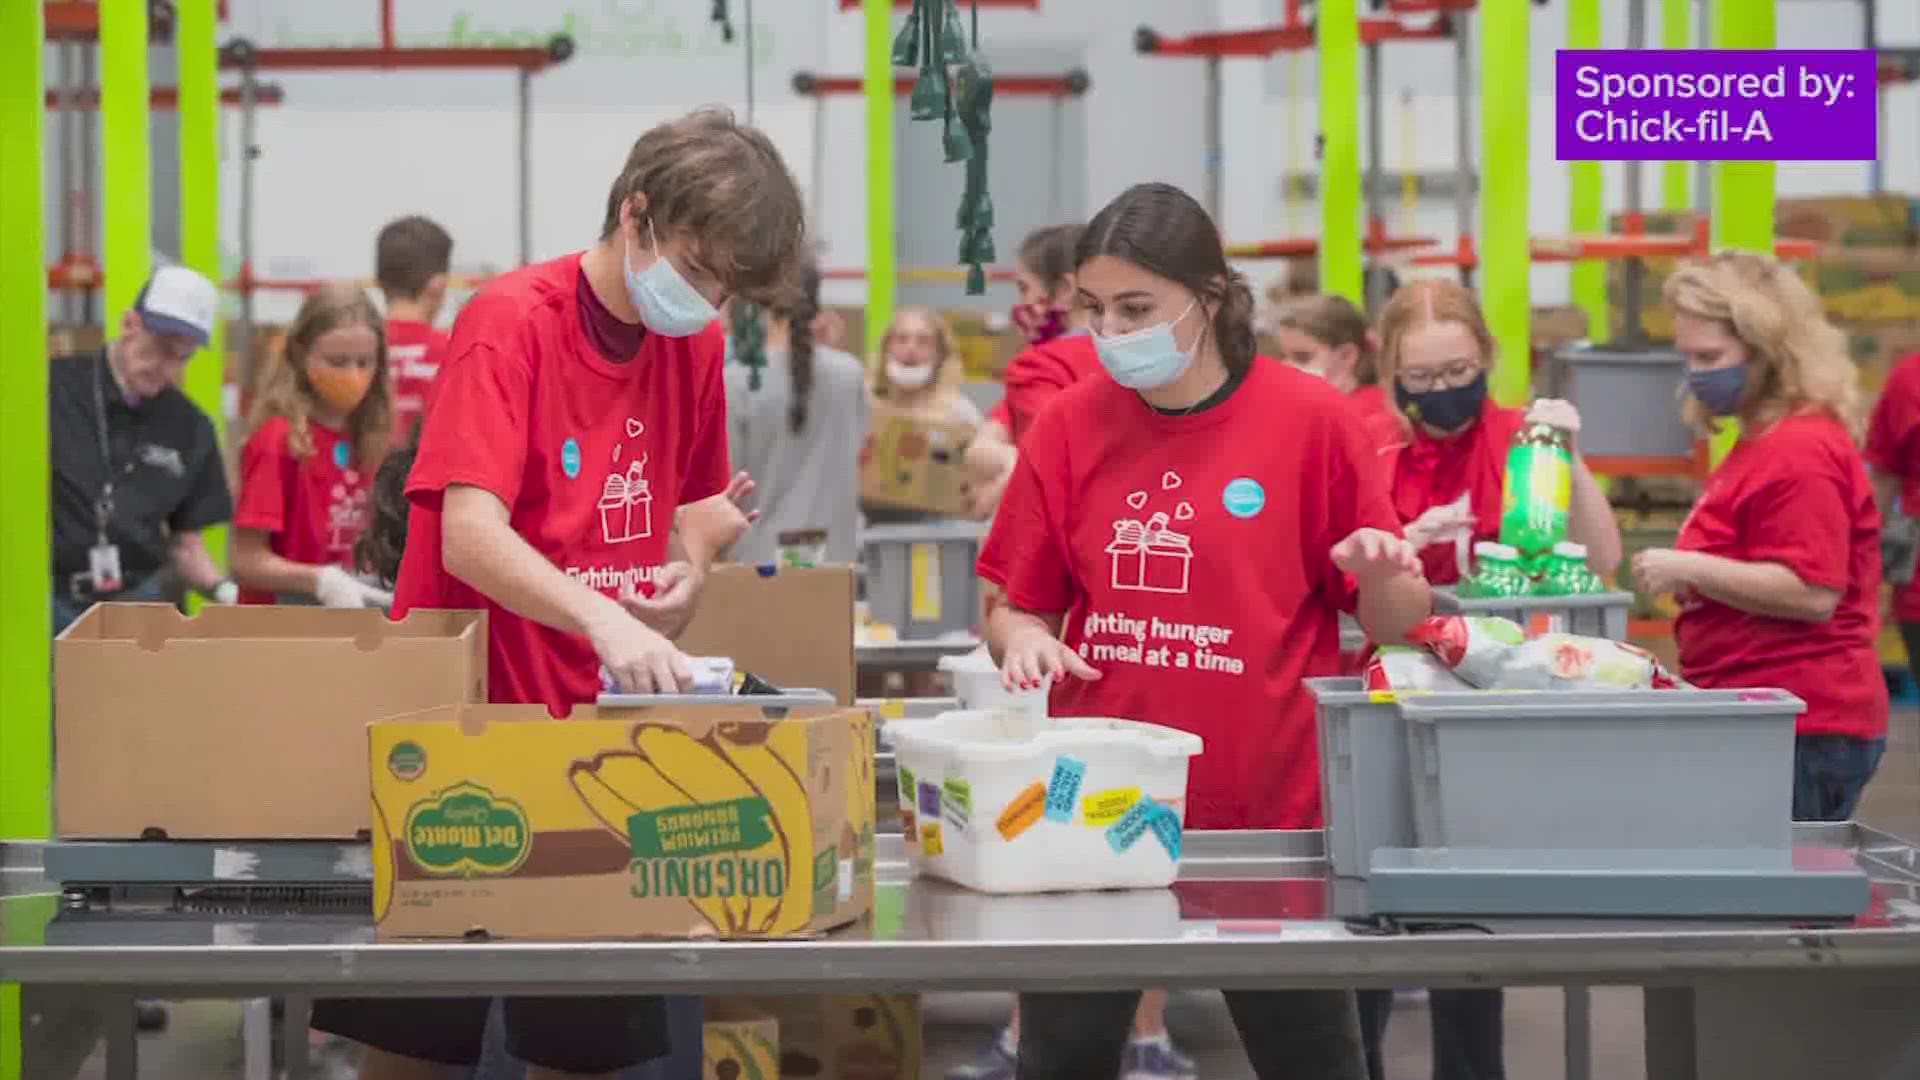 Chick-fil-a has teamed up with the Houston Food Bank and other local food charities to provide one million meals this year to hungry Houstonians.